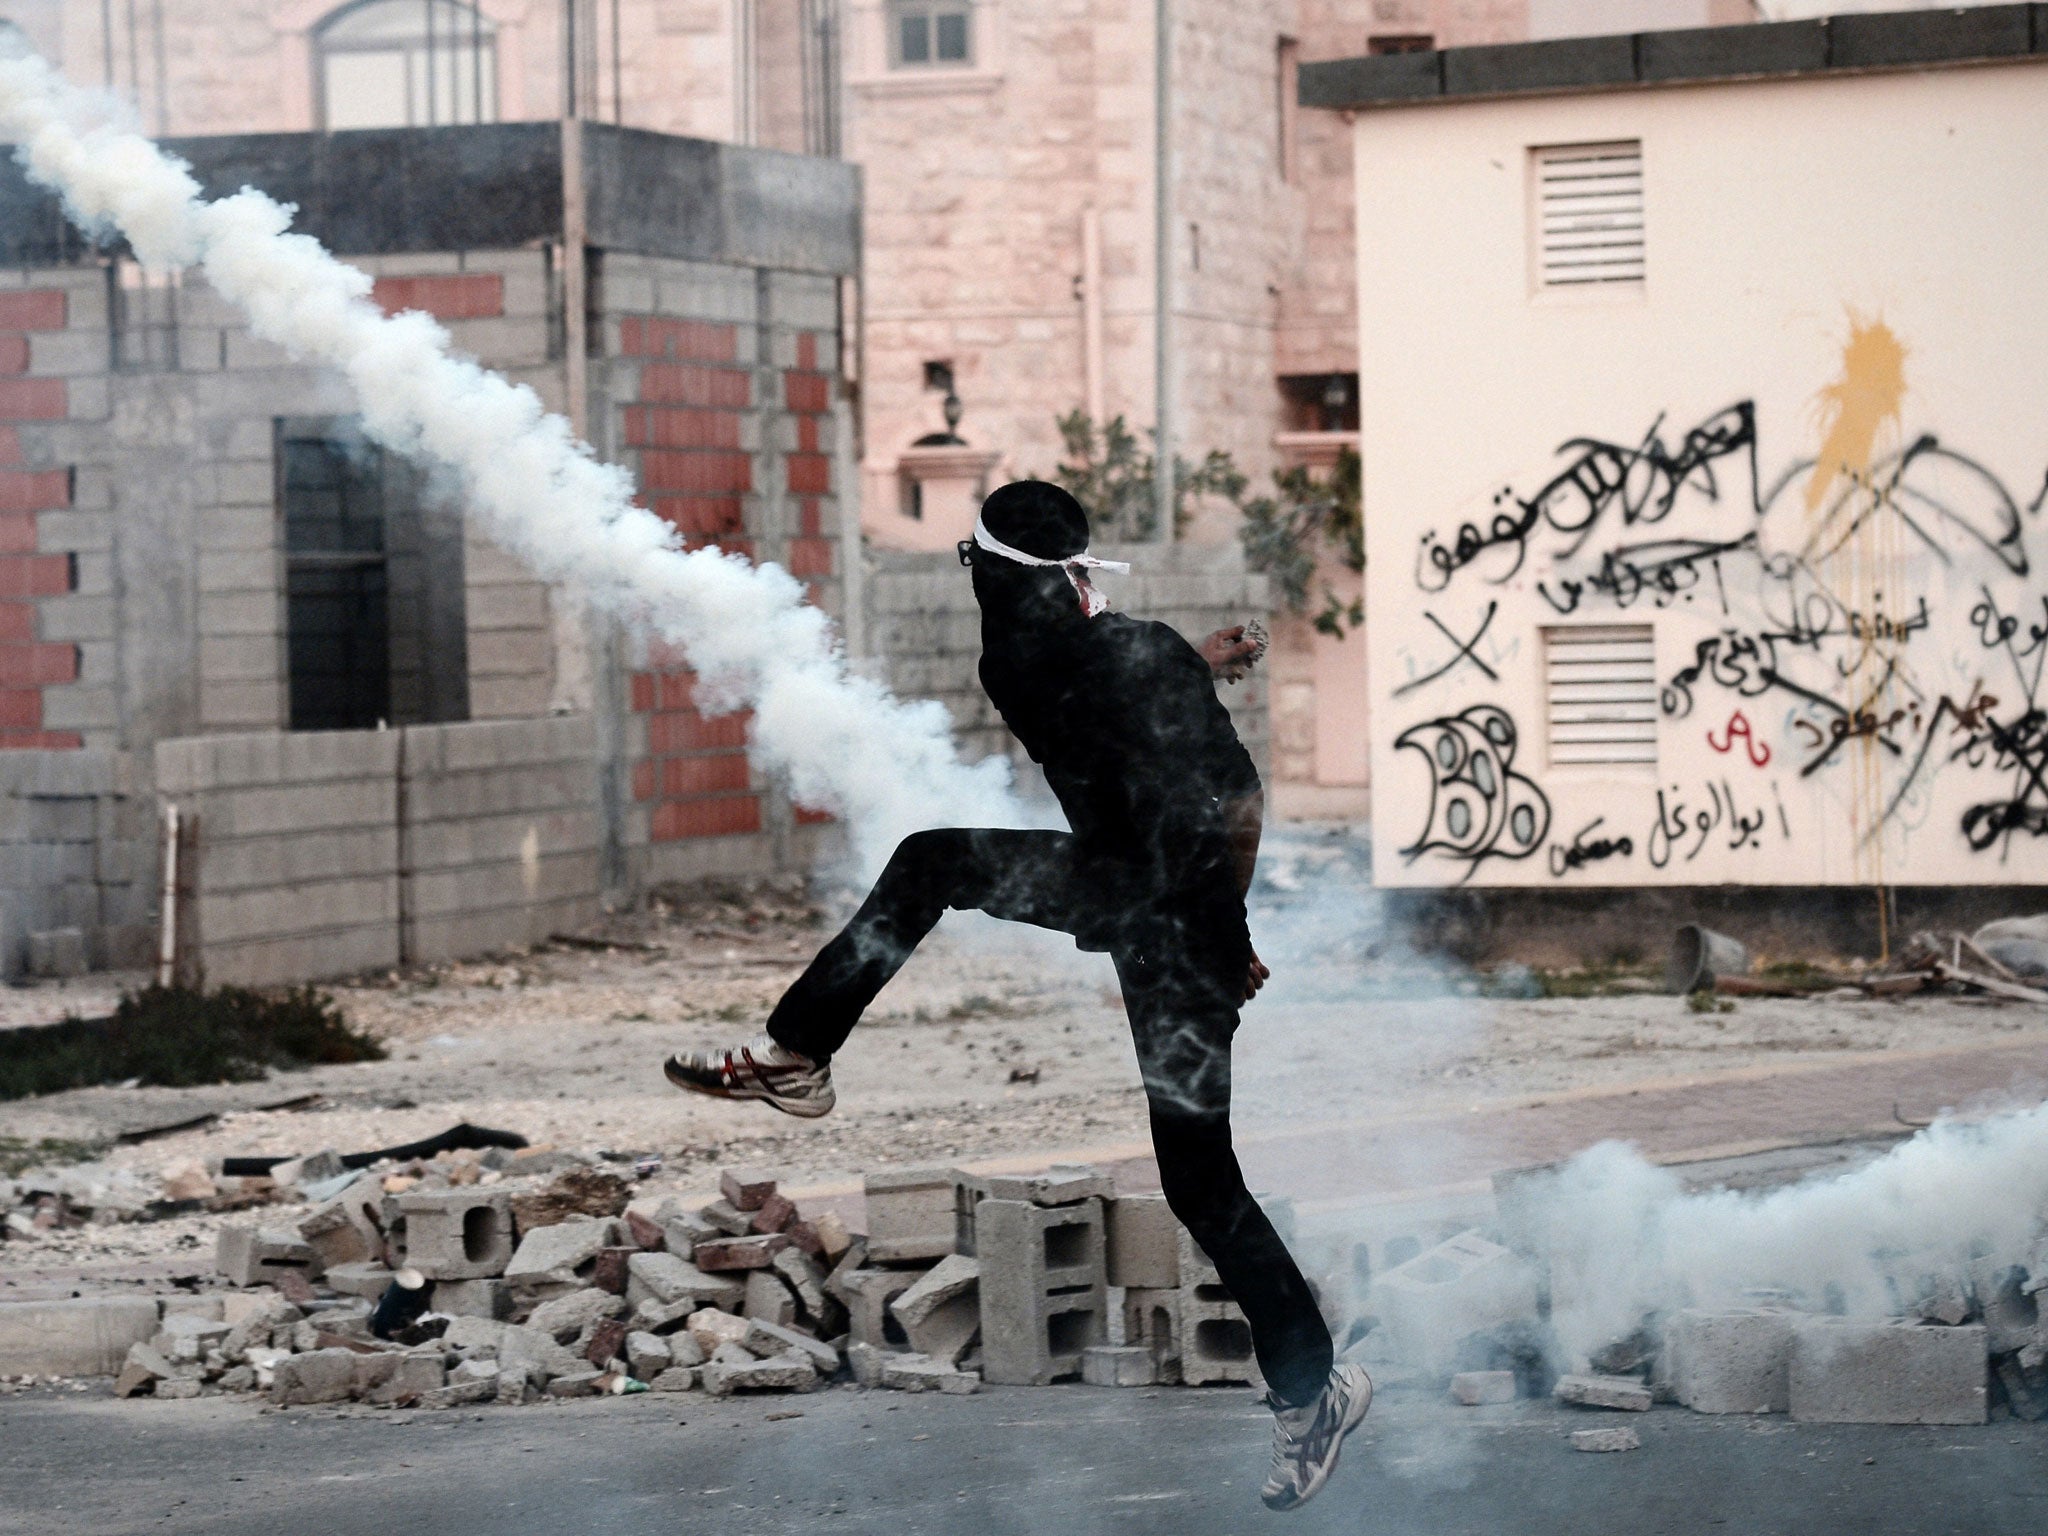 A Bahraini protester clashes with riot police following the funeral of 20-year-old prisoner Fadel Abbas Musalem in the village of Diraz on January 26, 2014